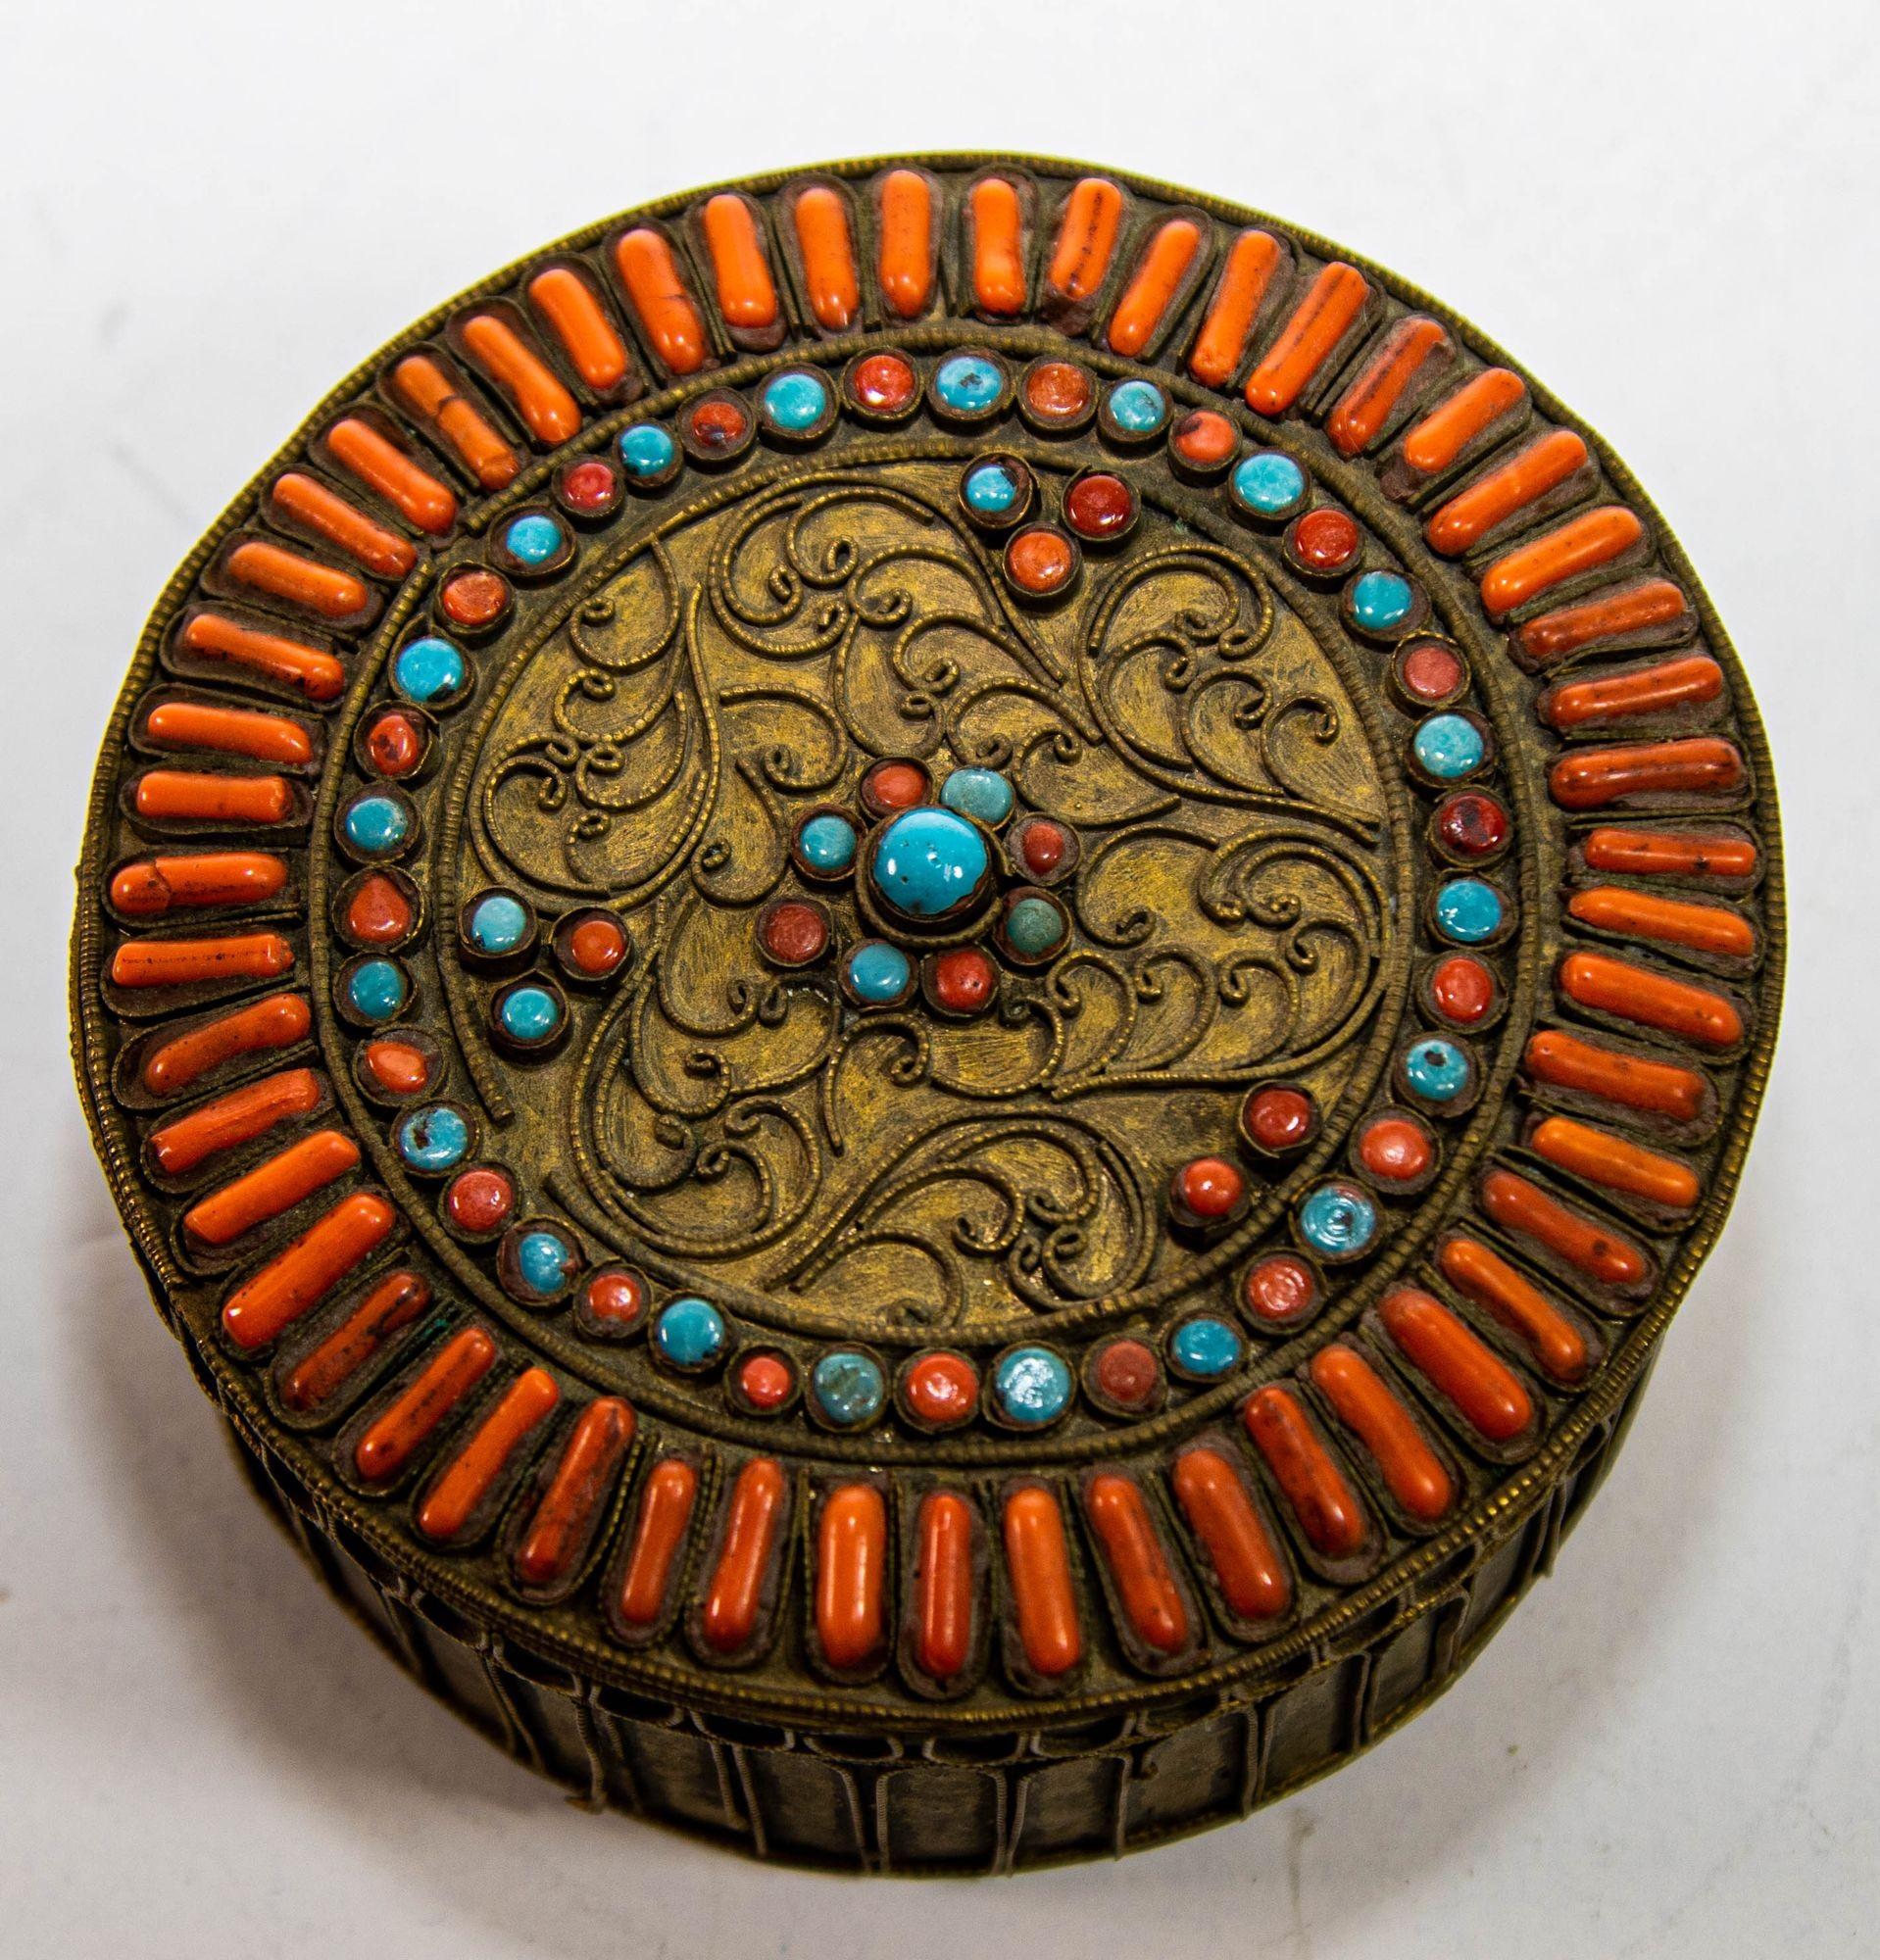 Antique Chinese Tibetan Brass Filigree with Turquoise and Coral beads round Box
Handcrafted round Tibetan, Nepalese decorative brass trinket wish box.
Antique Asian Tibetan hand made box inlaid with polished turquoise and coral glass inlay